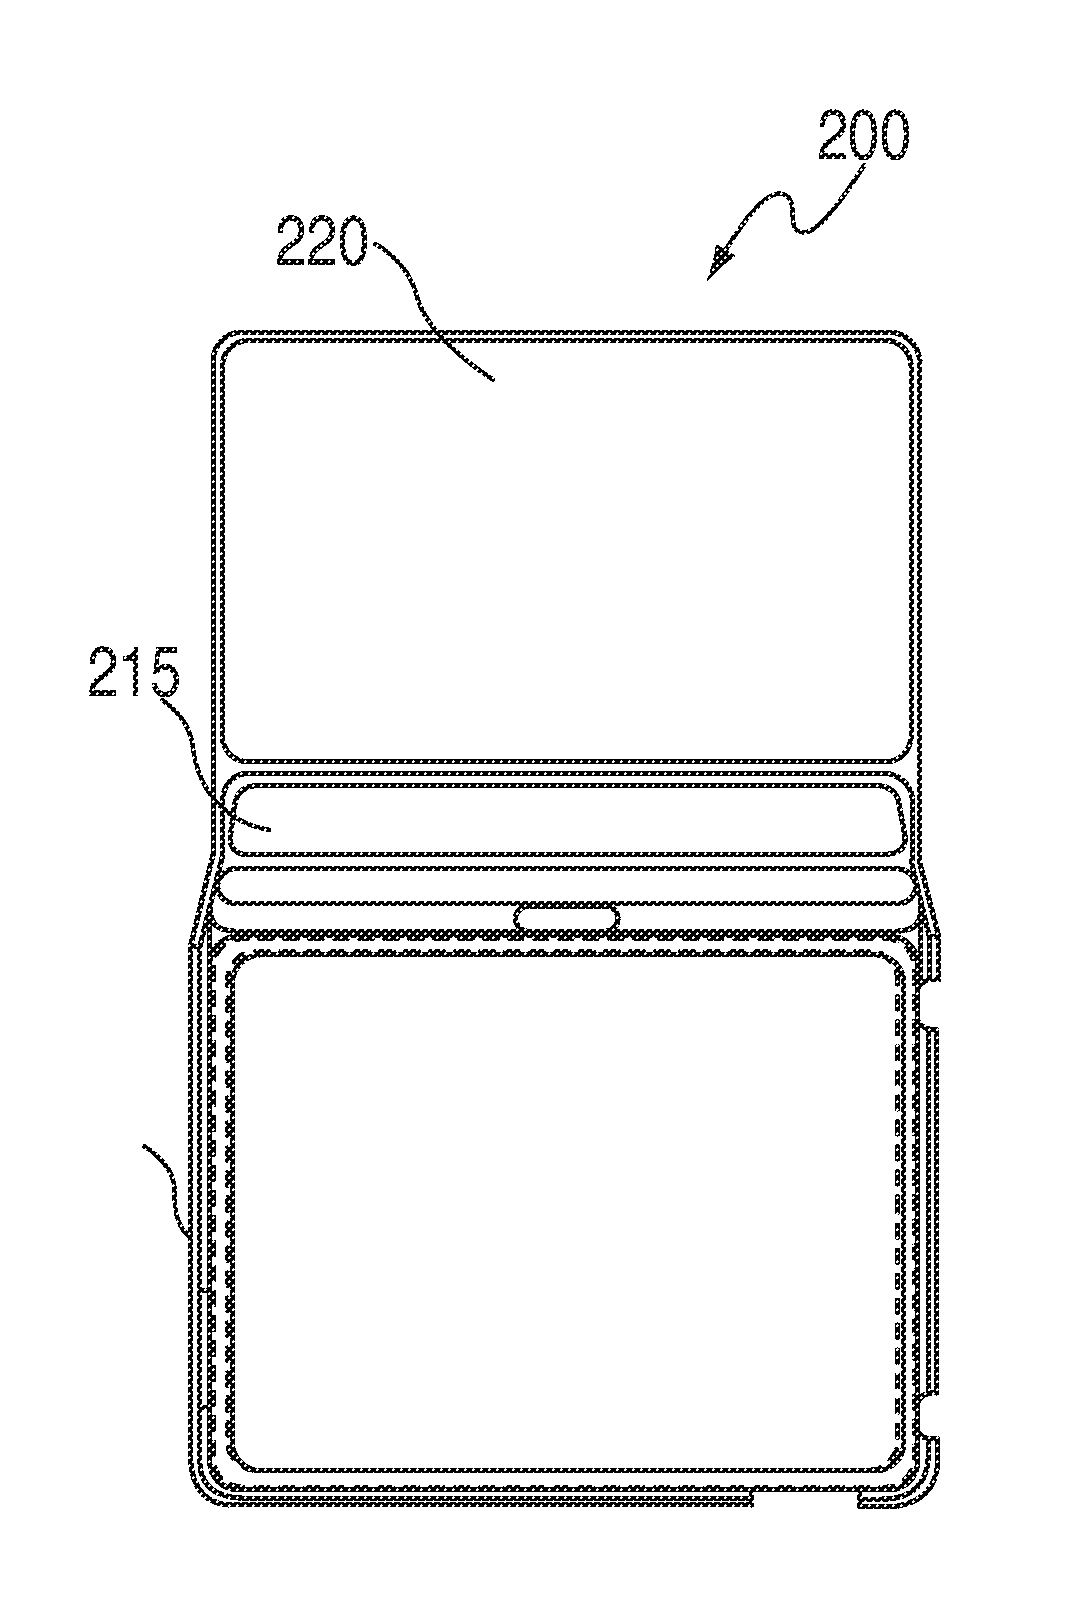 Foldable case for use with an electronic device